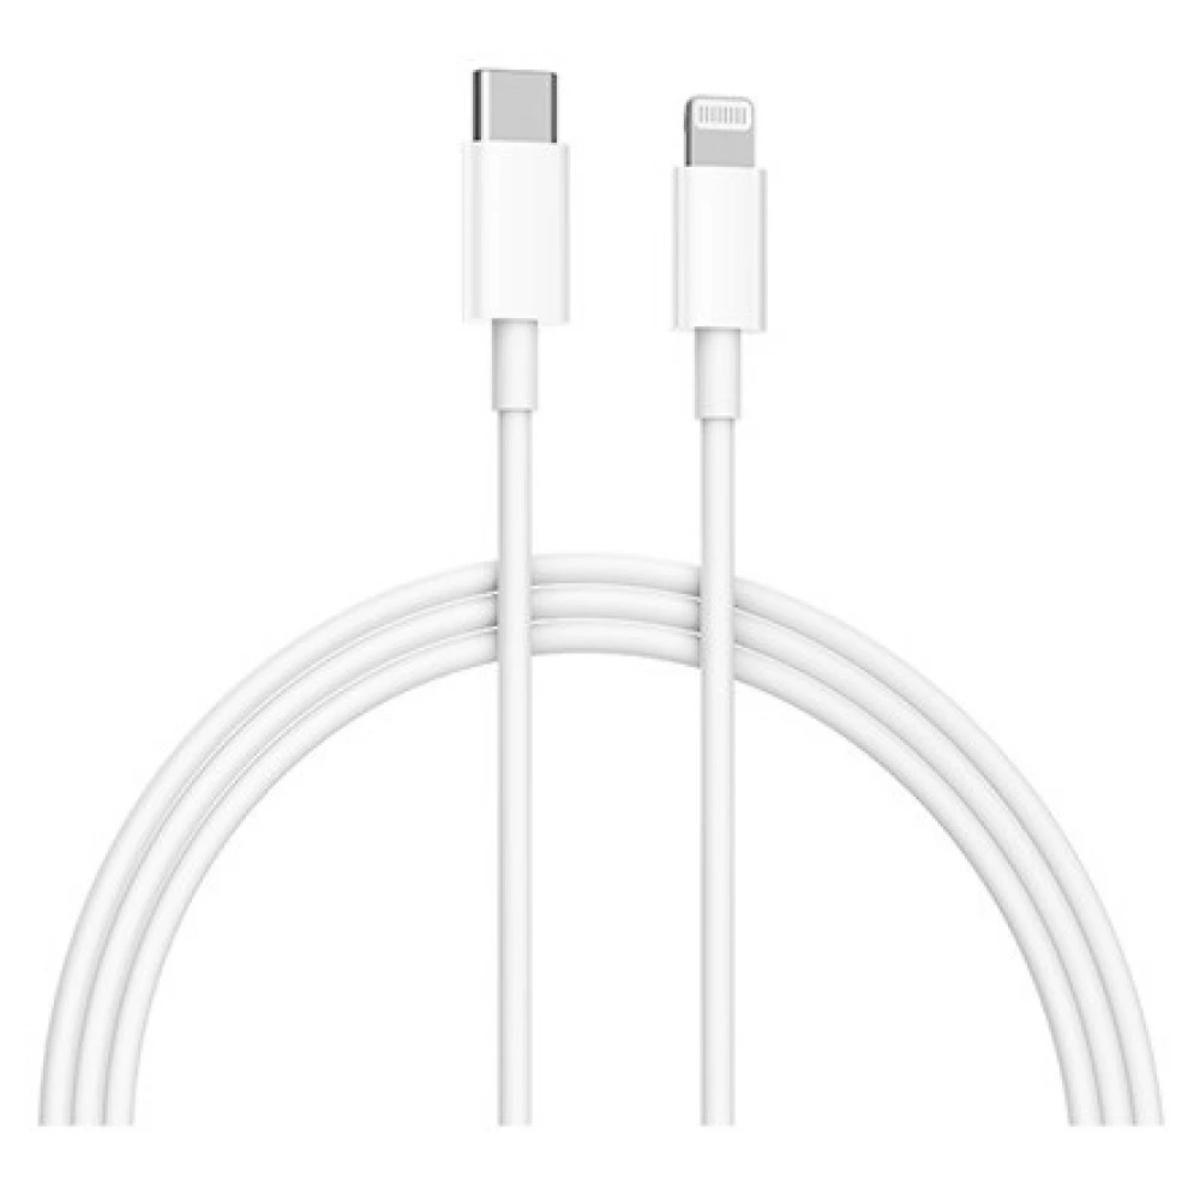 BHR4421GL/Xiaomi MI USB-C® TO LIGHTNING  CABLE 1M CABLE / 1 METER